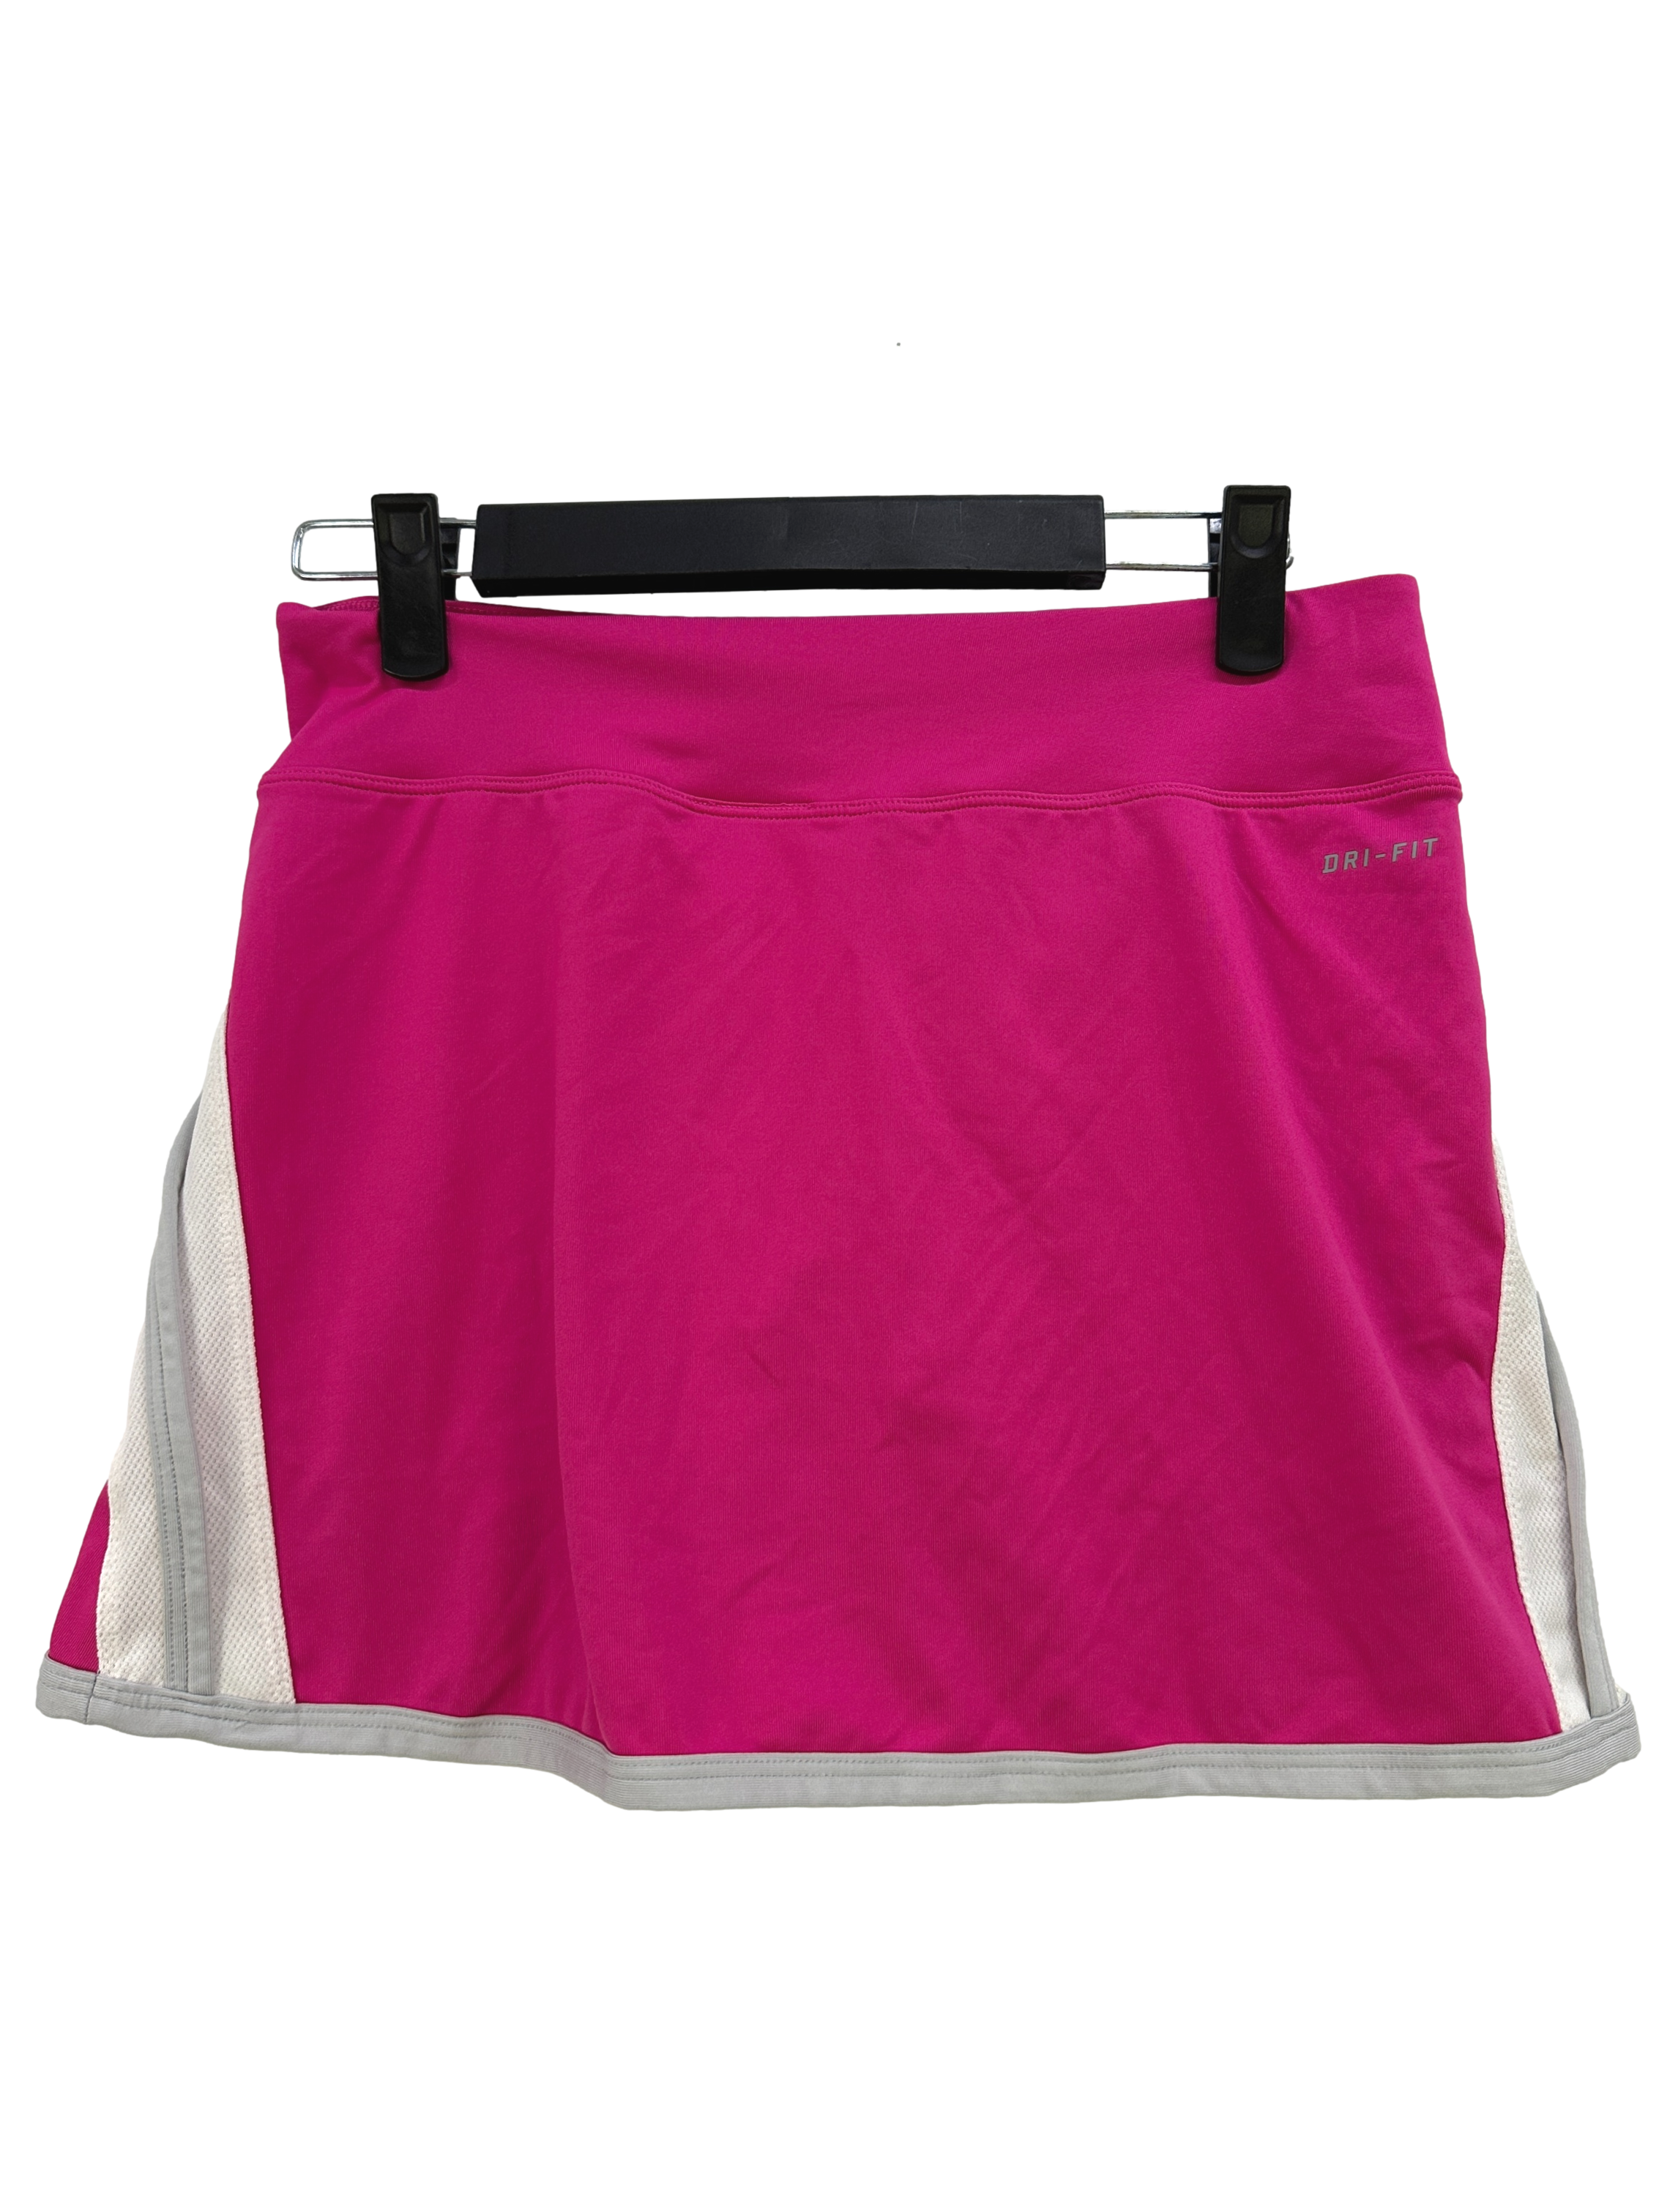 Hot Pink And White Skirt